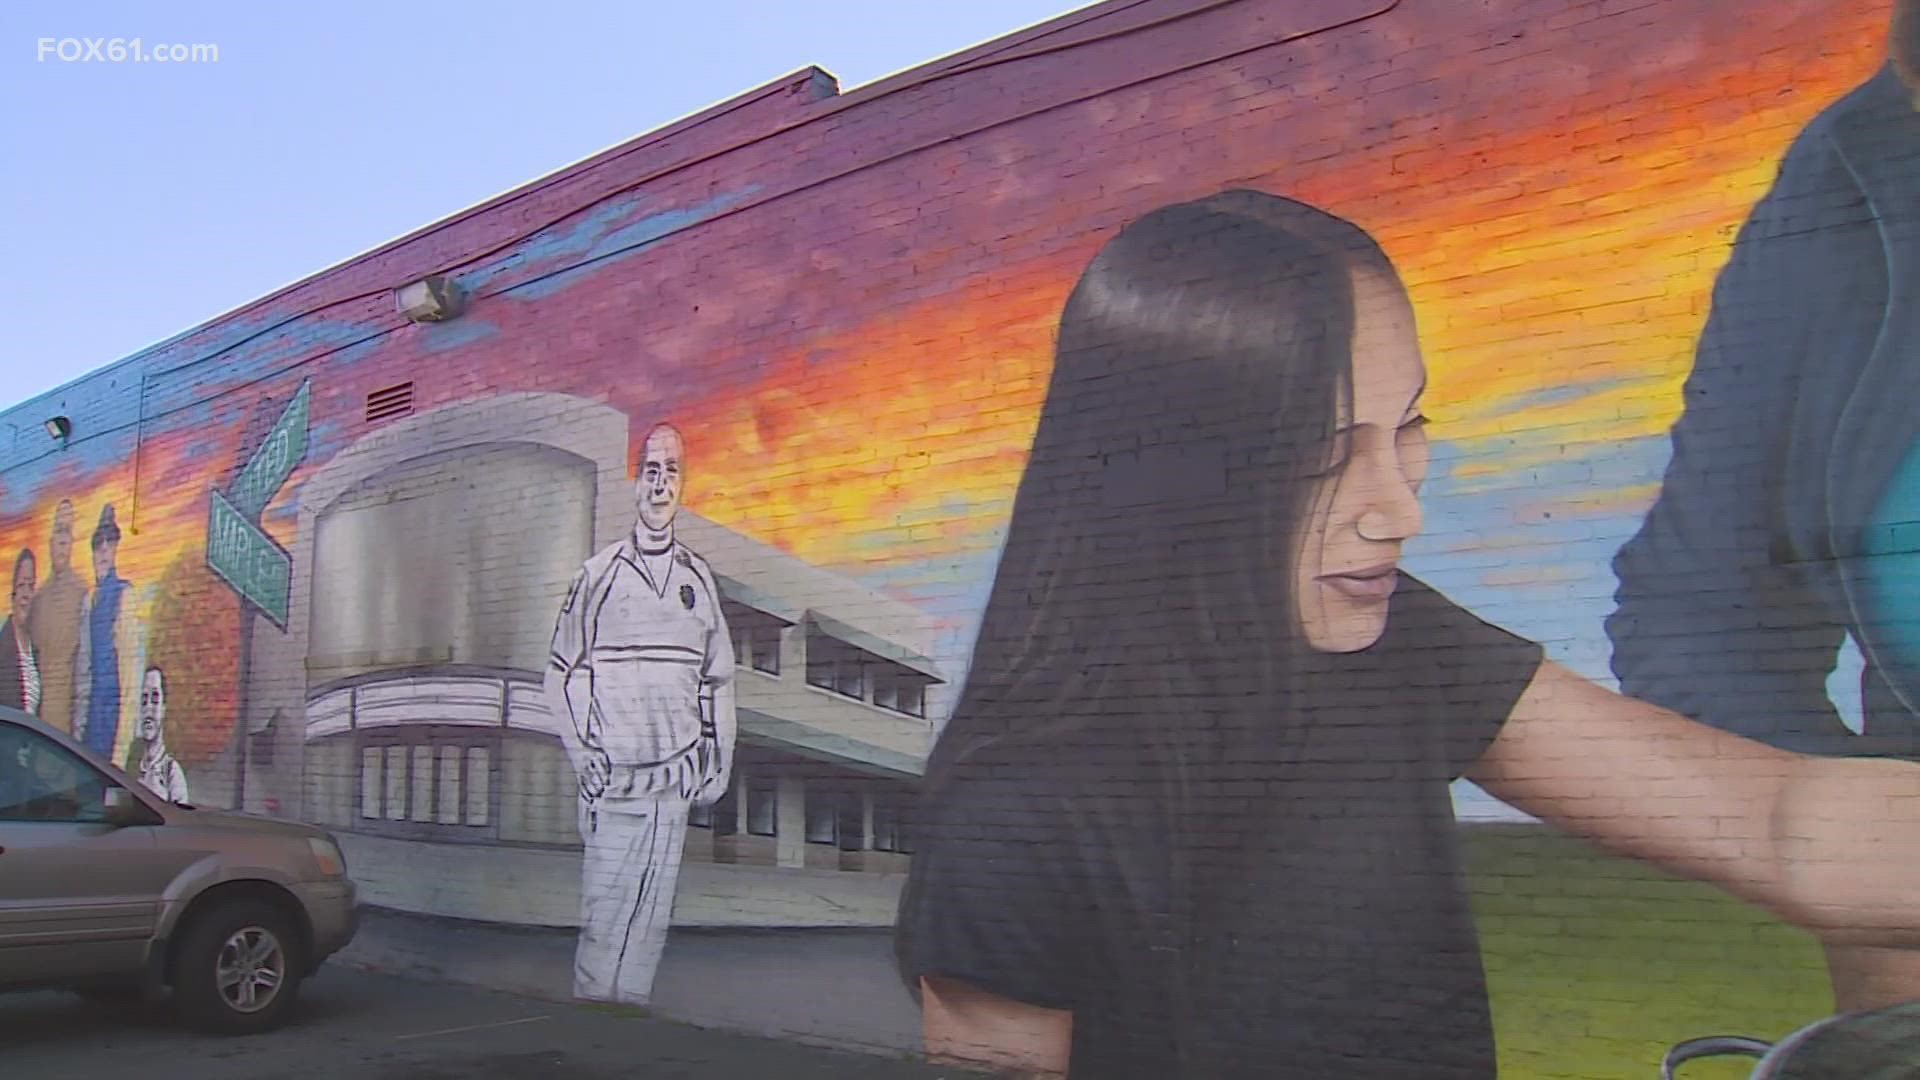 The mural was made possible with the help of United Way.